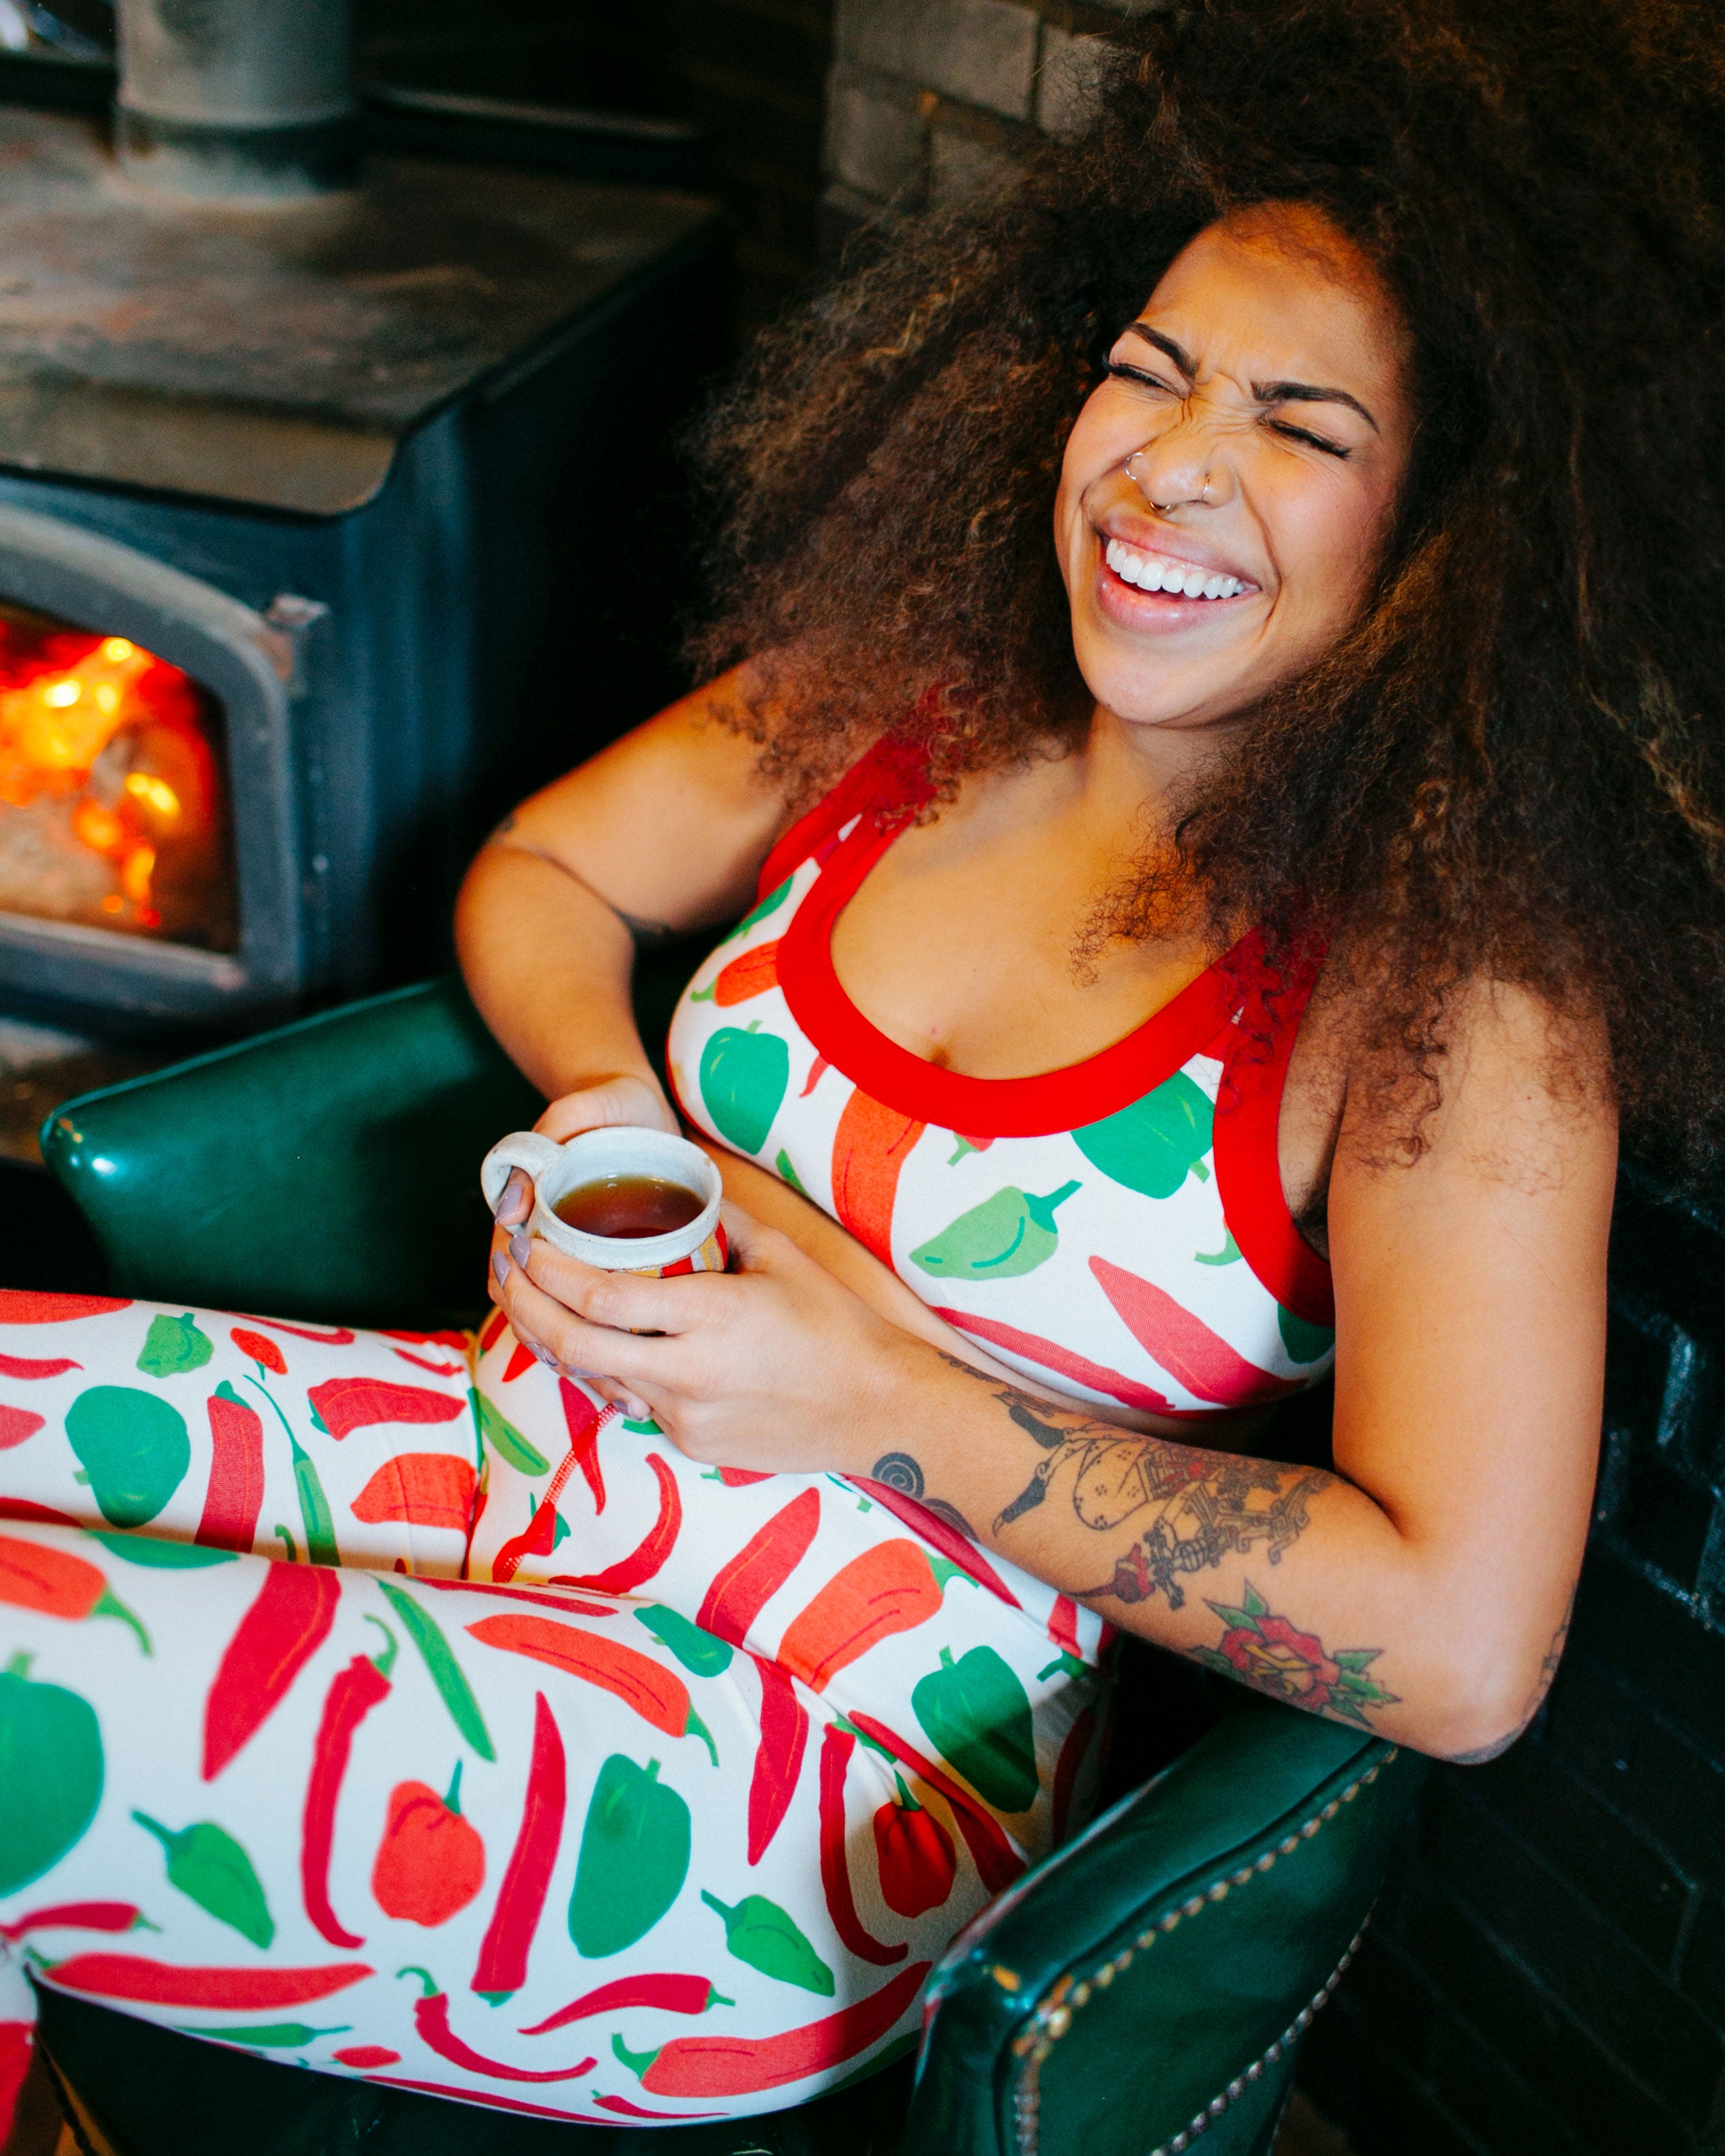 Model sitting by the fire laughing wearing Thunderpants organic cotton Bralette and Leggings in our Hot Pants print: various green, orange, and red peppers printed on Vanilla with red binding.